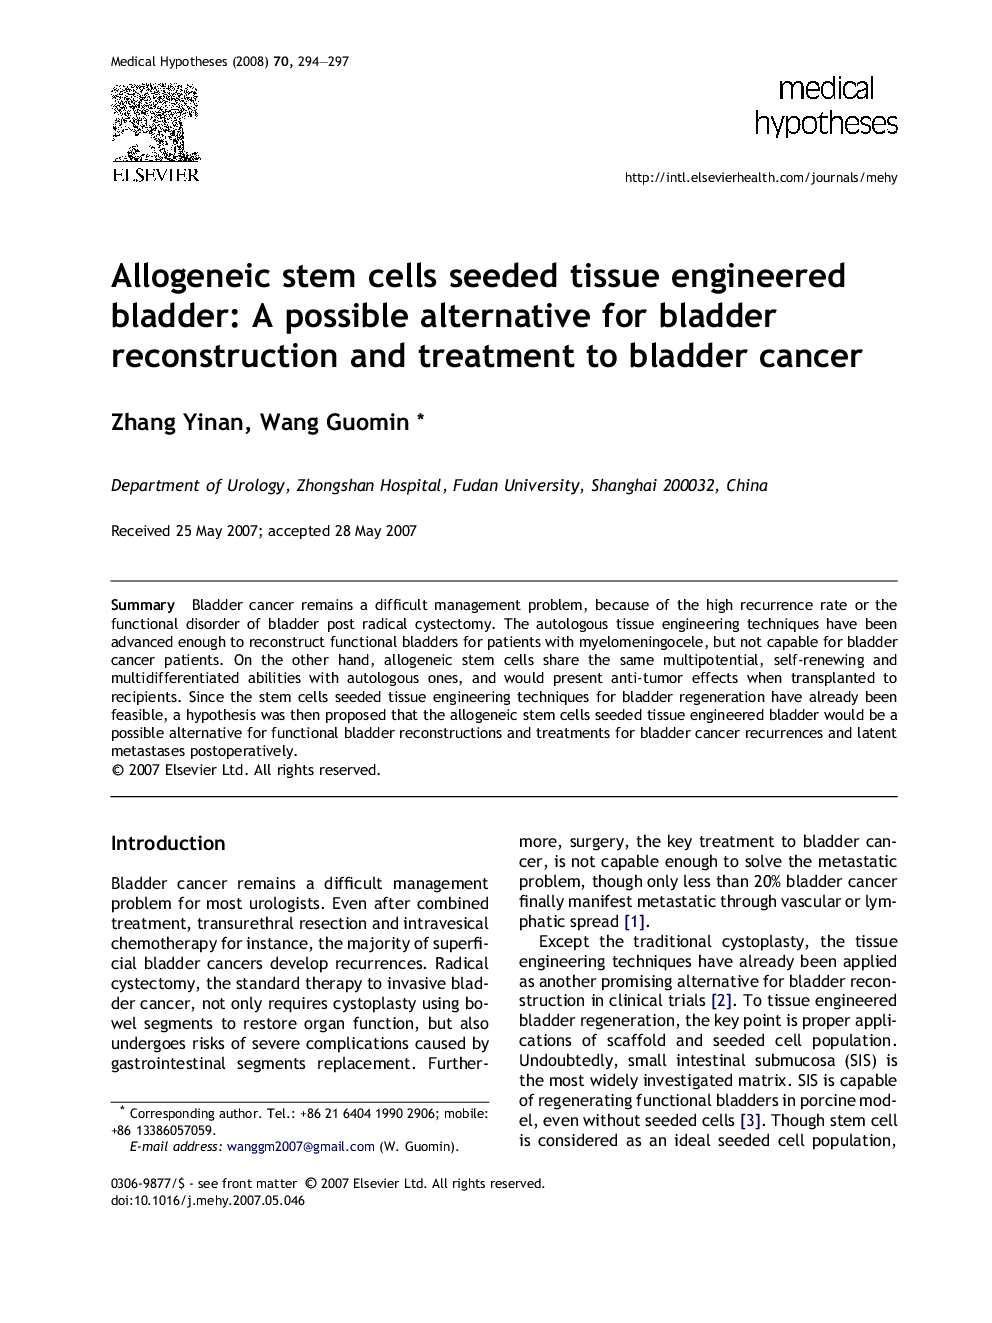 Allogeneic stem cells seeded tissue engineered bladder: A possible alternative for bladder reconstruction and treatment to bladder cancer